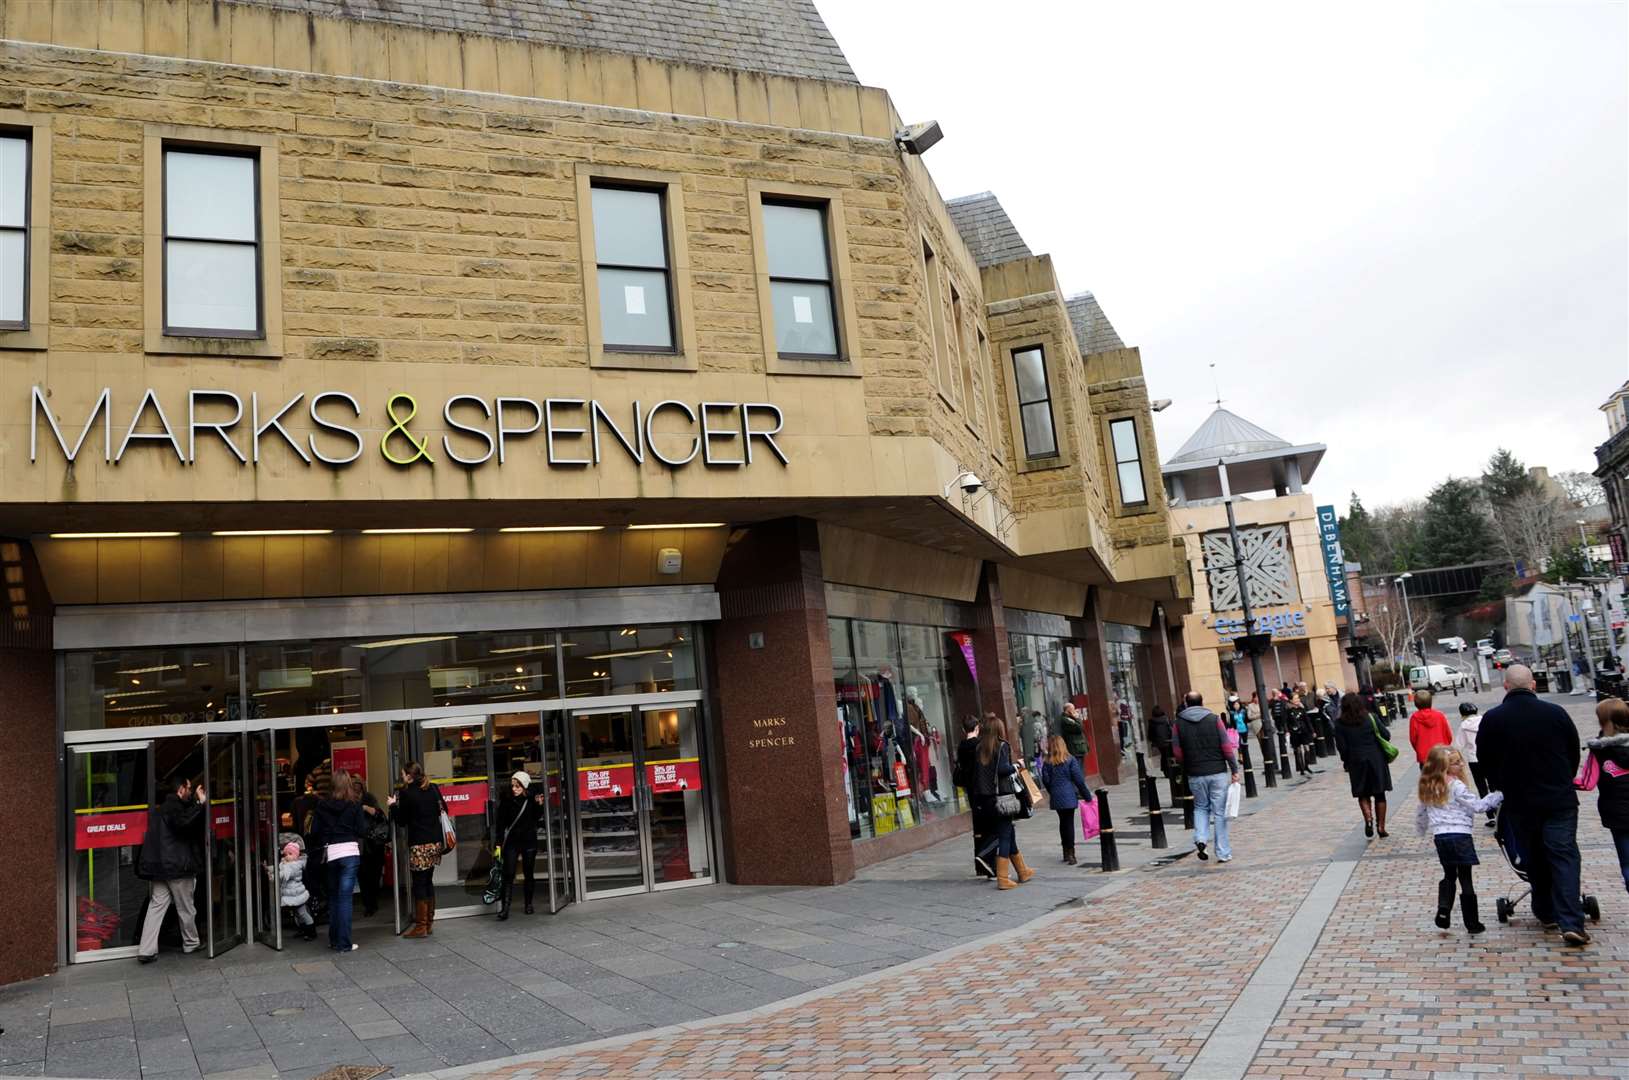 Marks & Spencer's Eastgate store in Inverness.